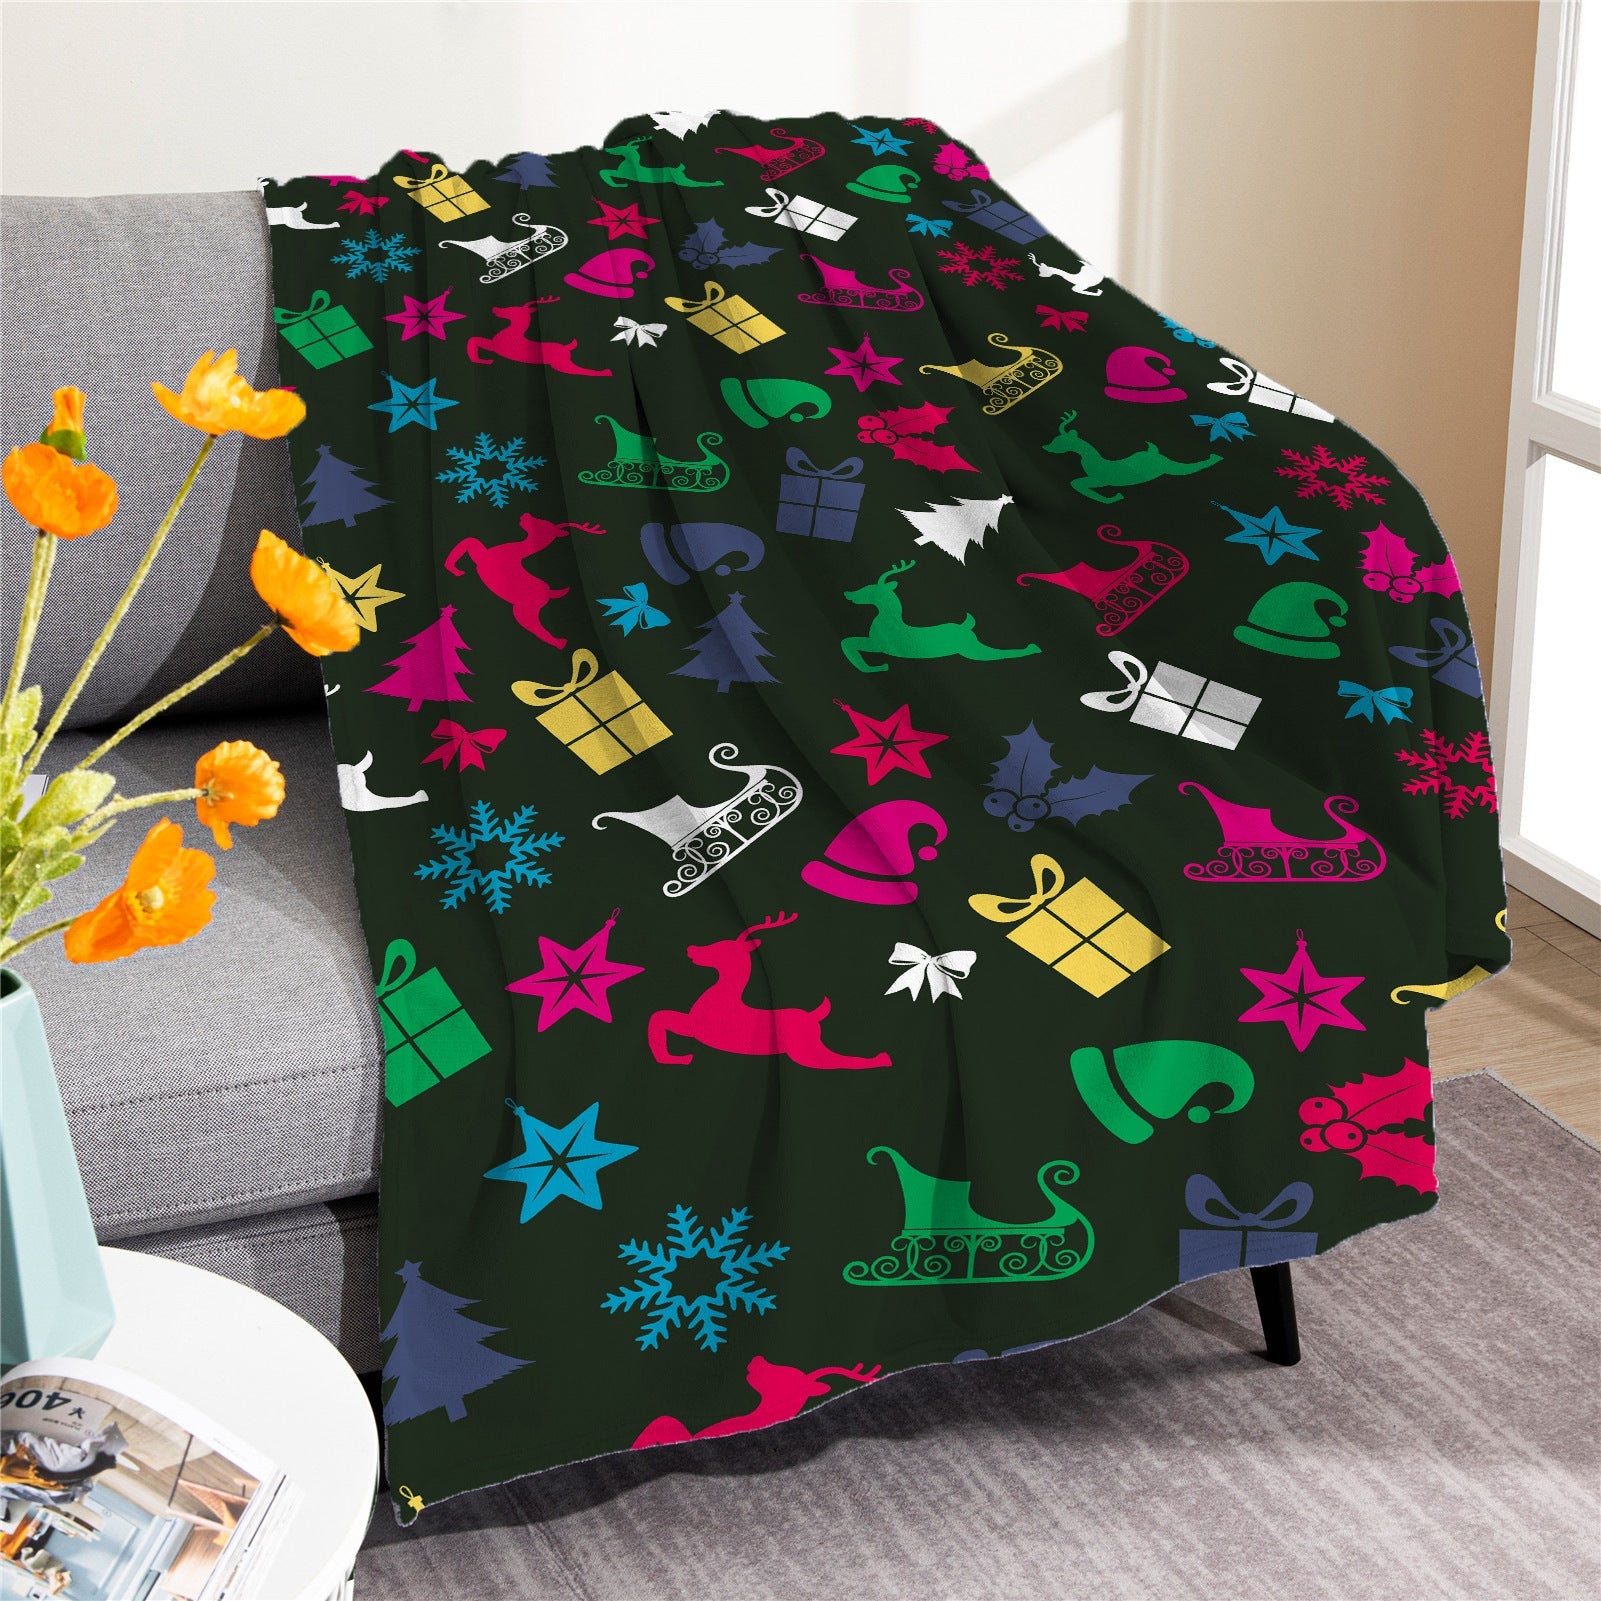 Merry Christmas Soft Fleece Throw Blankets-Blankets-M20220916-5-50*60 inches-Free Shipping at meselling99